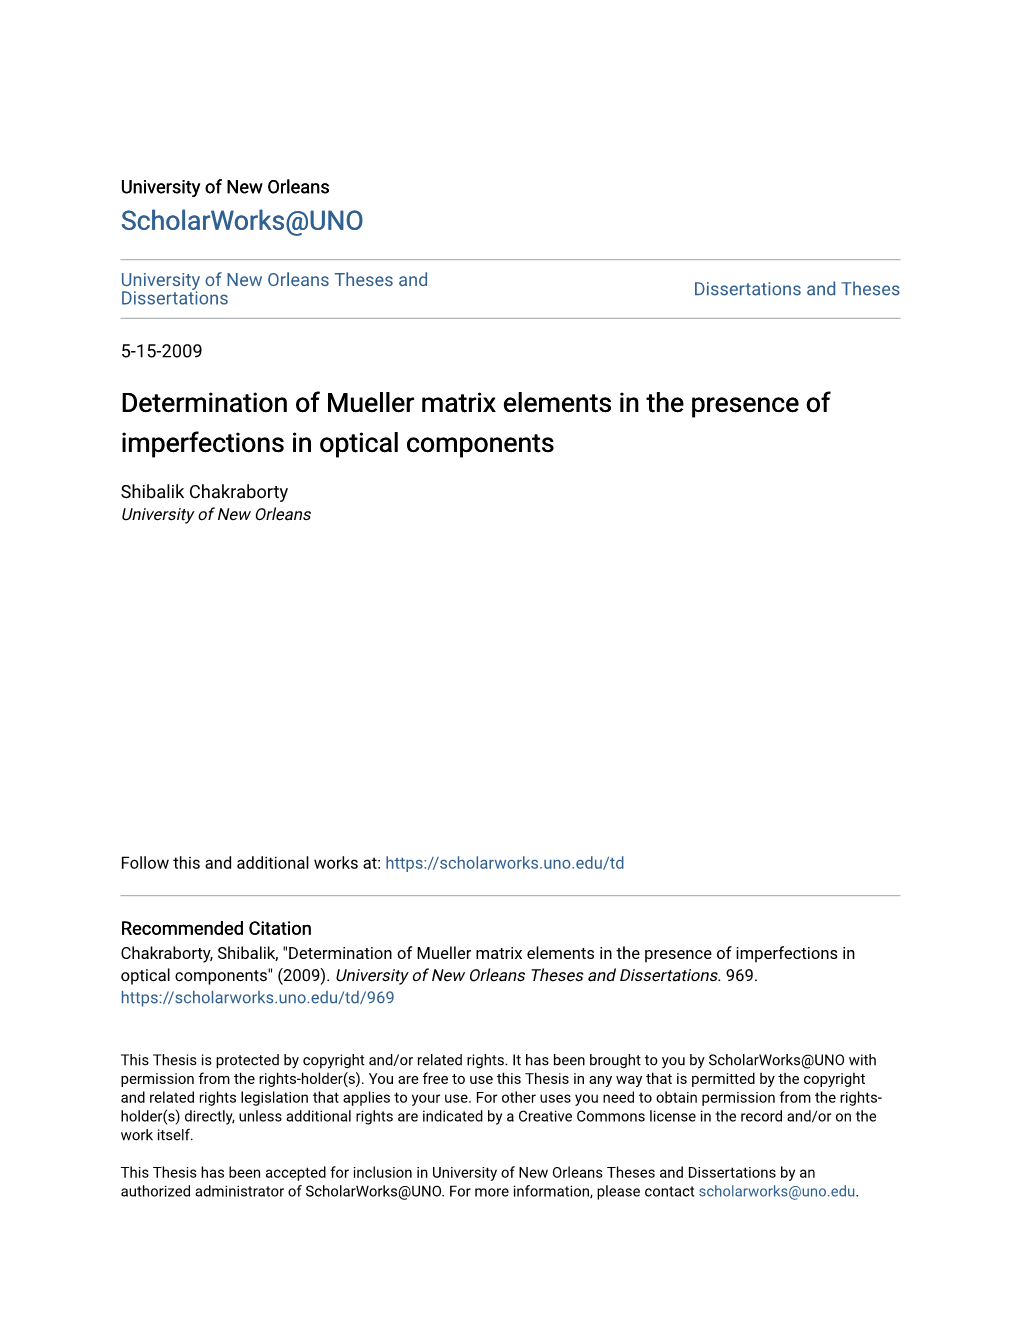 Determination of Mueller Matrix Elements in the Presence of Imperfections in Optical Components